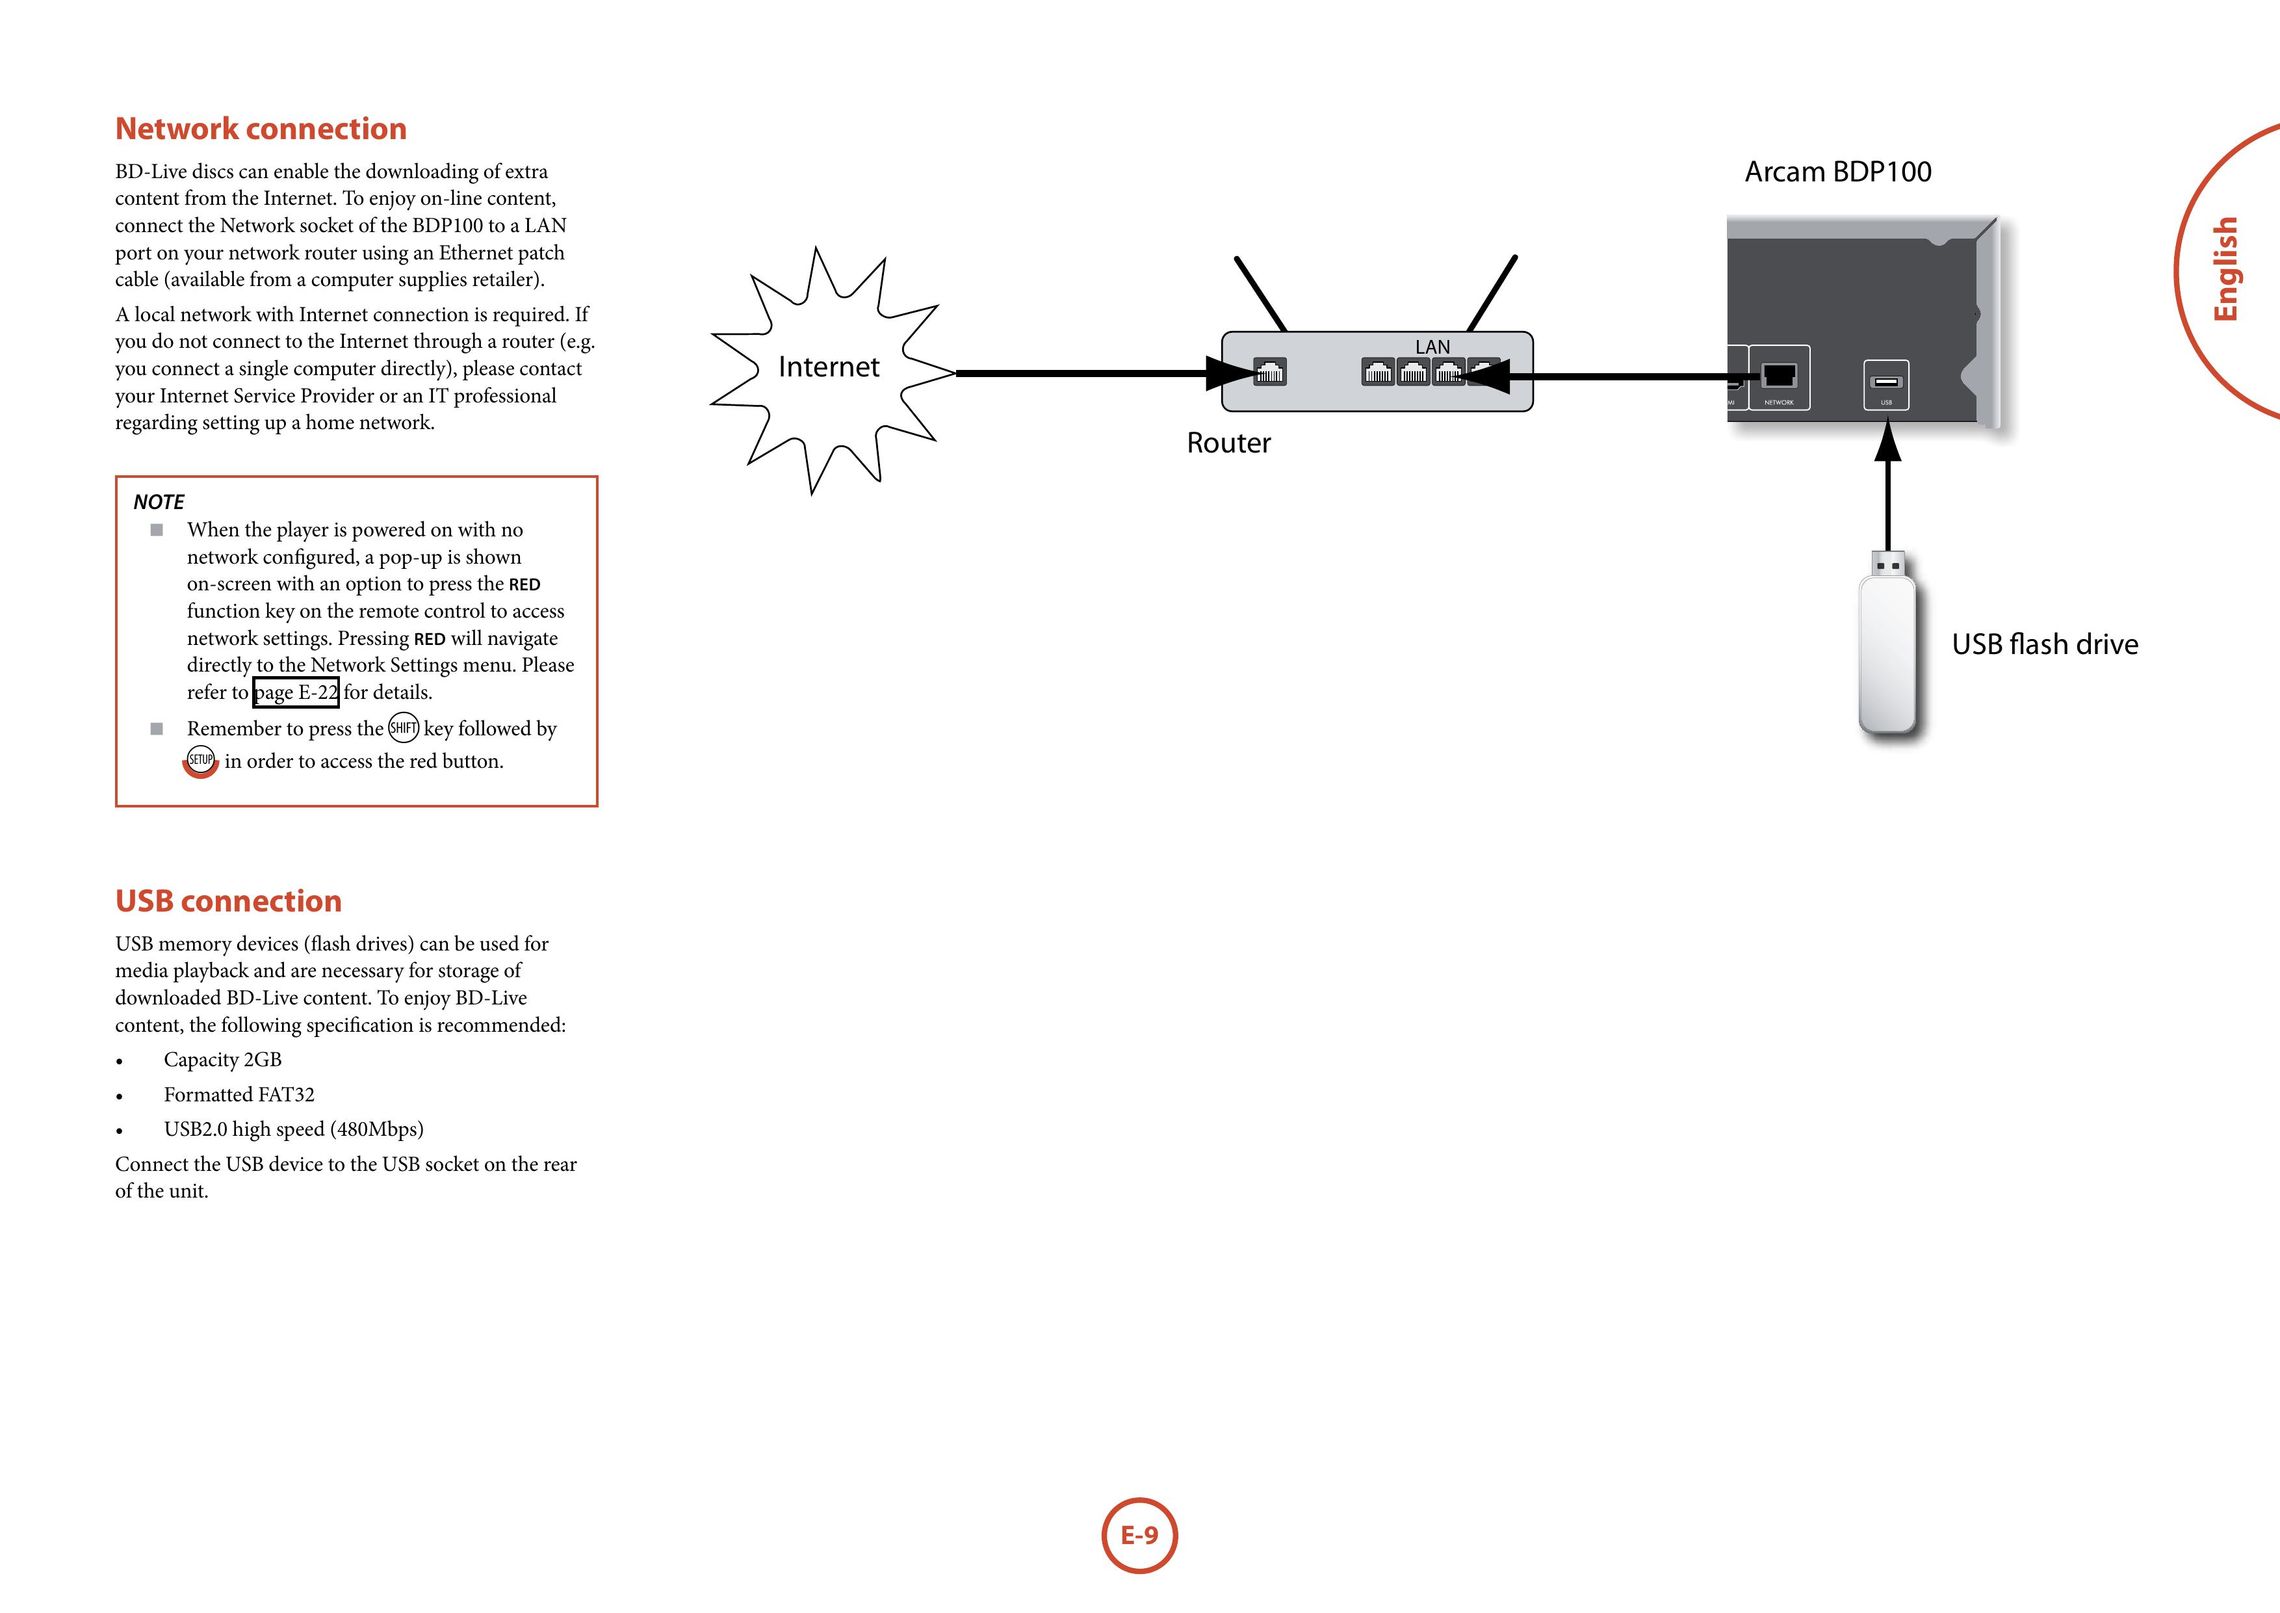 Arcam BDP100 Blu-ray Player User Manual (Page 11)